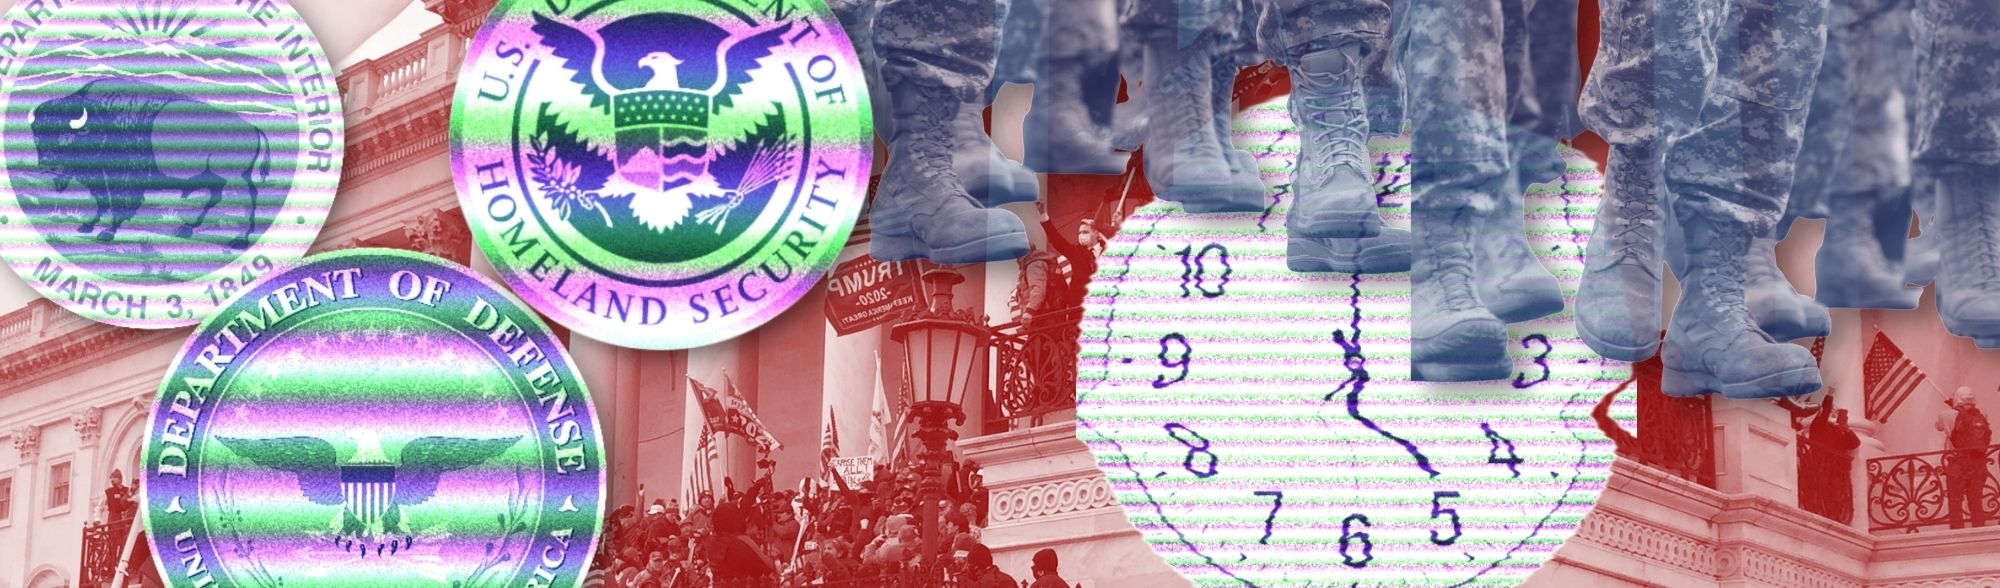 Dept. of Interior, Homeland Security, Defense logos and a warped clock. Background is a tinted red photo of Jan. 6th riot at the Capitol. There are national guard boots above that.